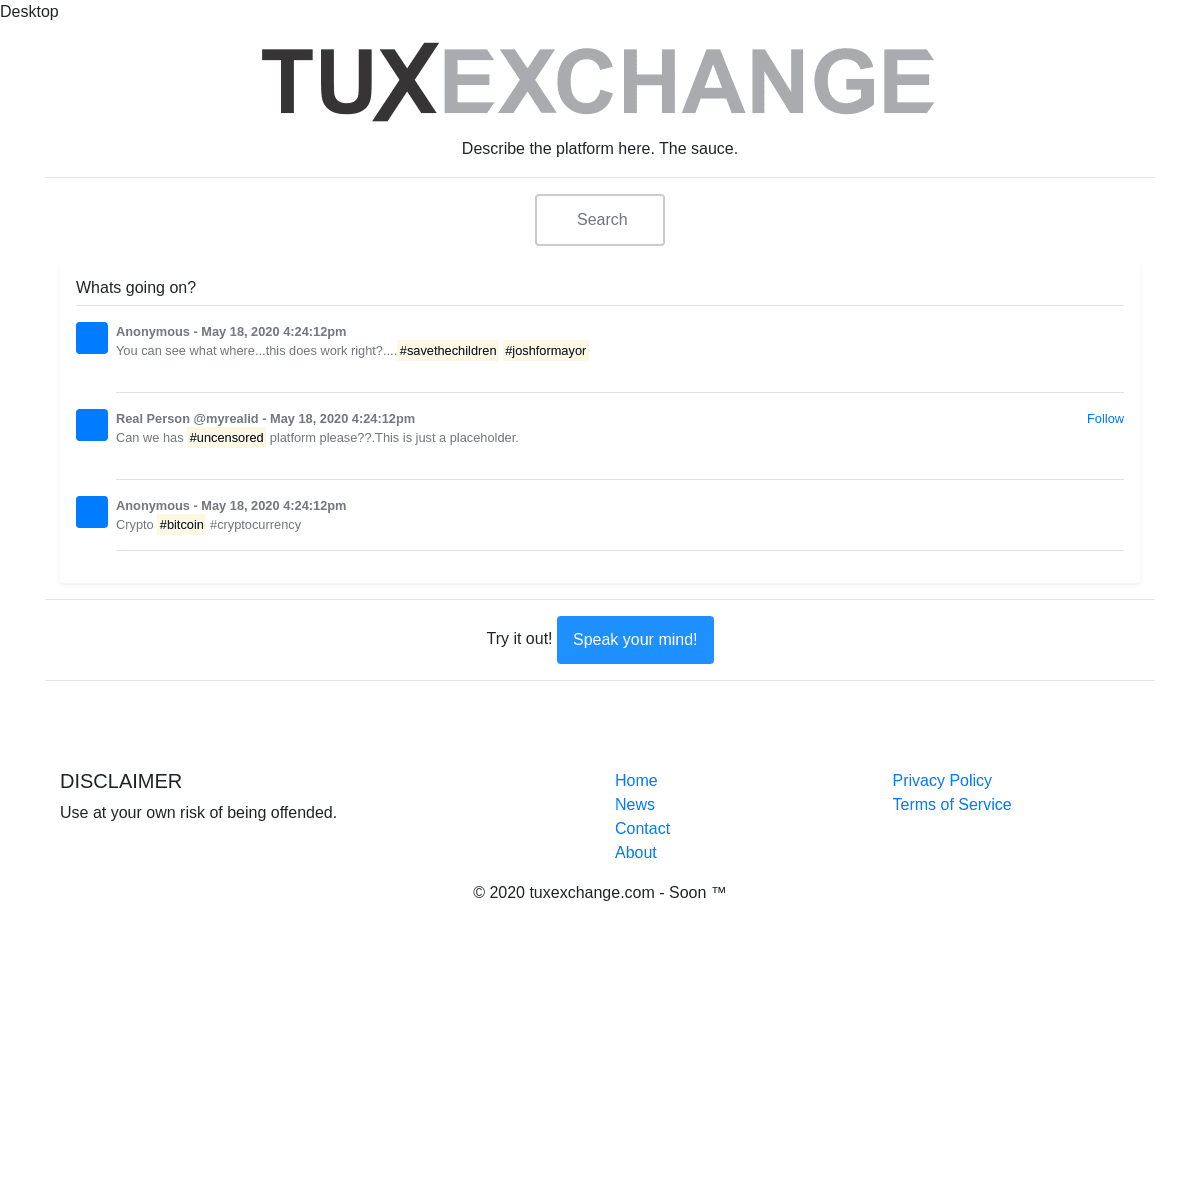 A complete backup of https://tuxexchange.com